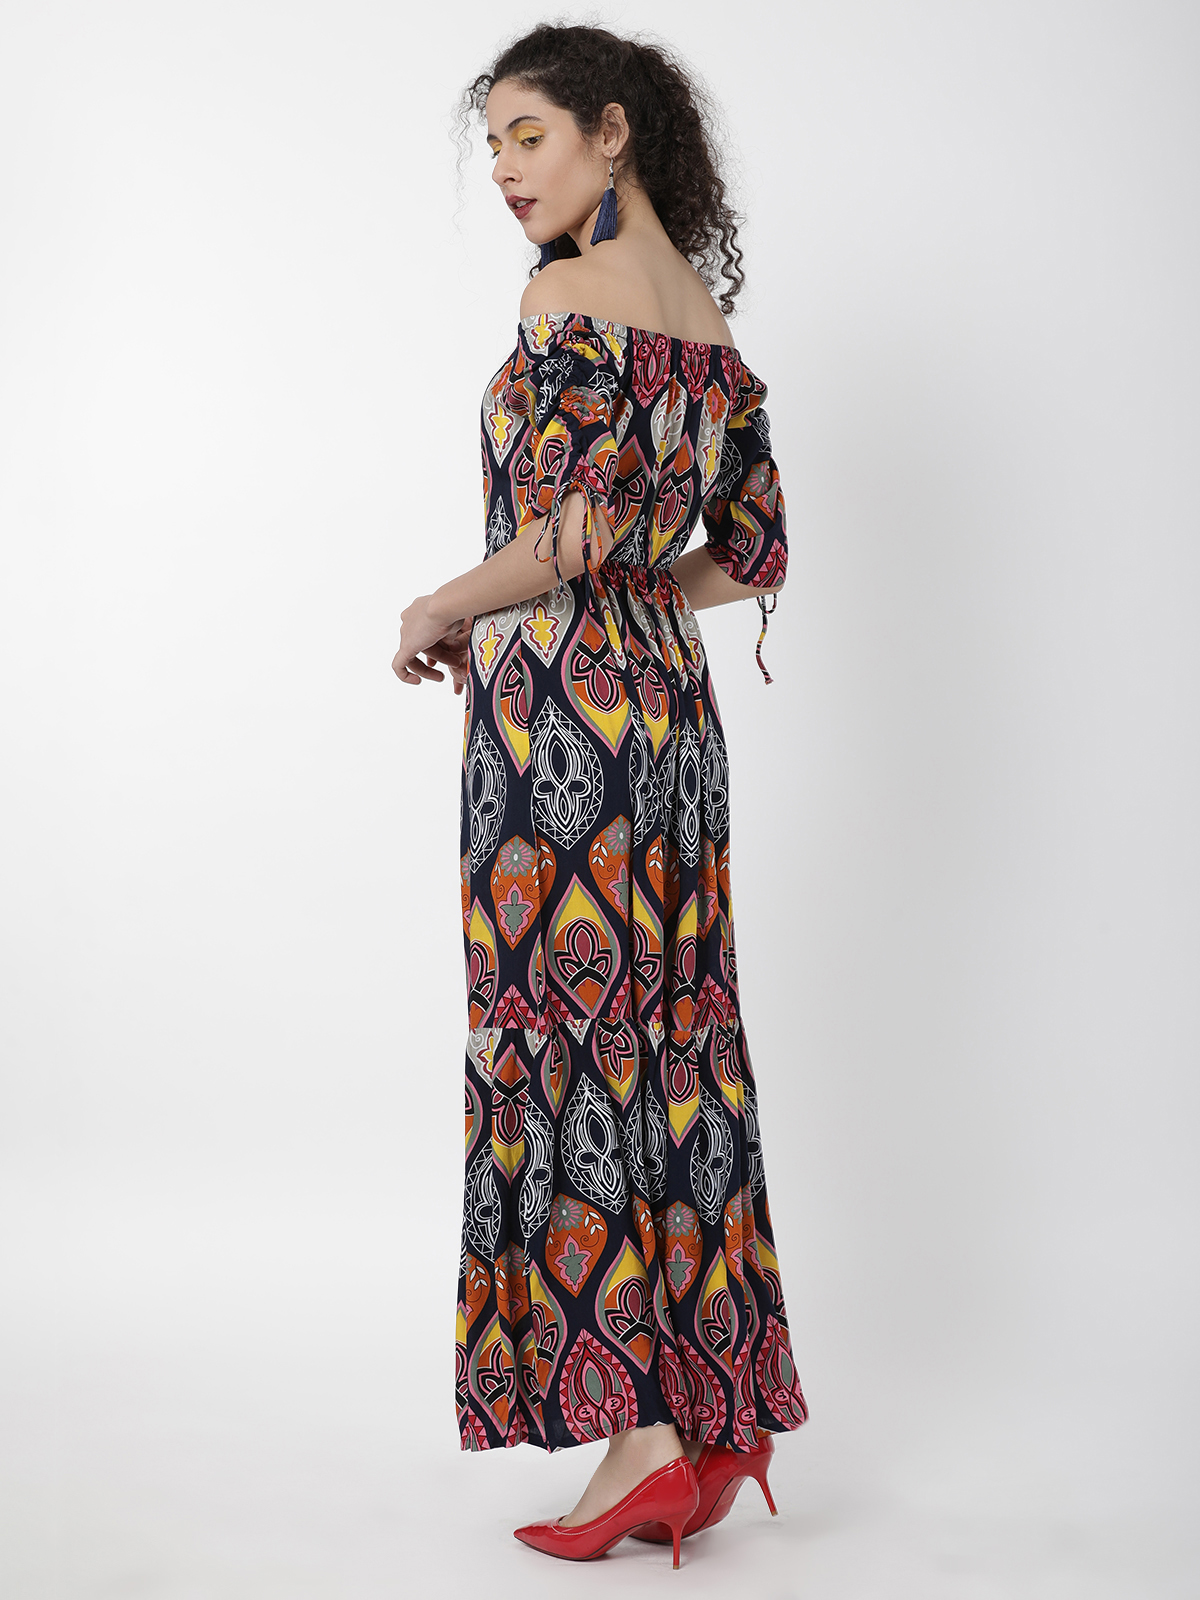 Bohemian Print Off Shoulder With Sleeve Tie Knot Dress